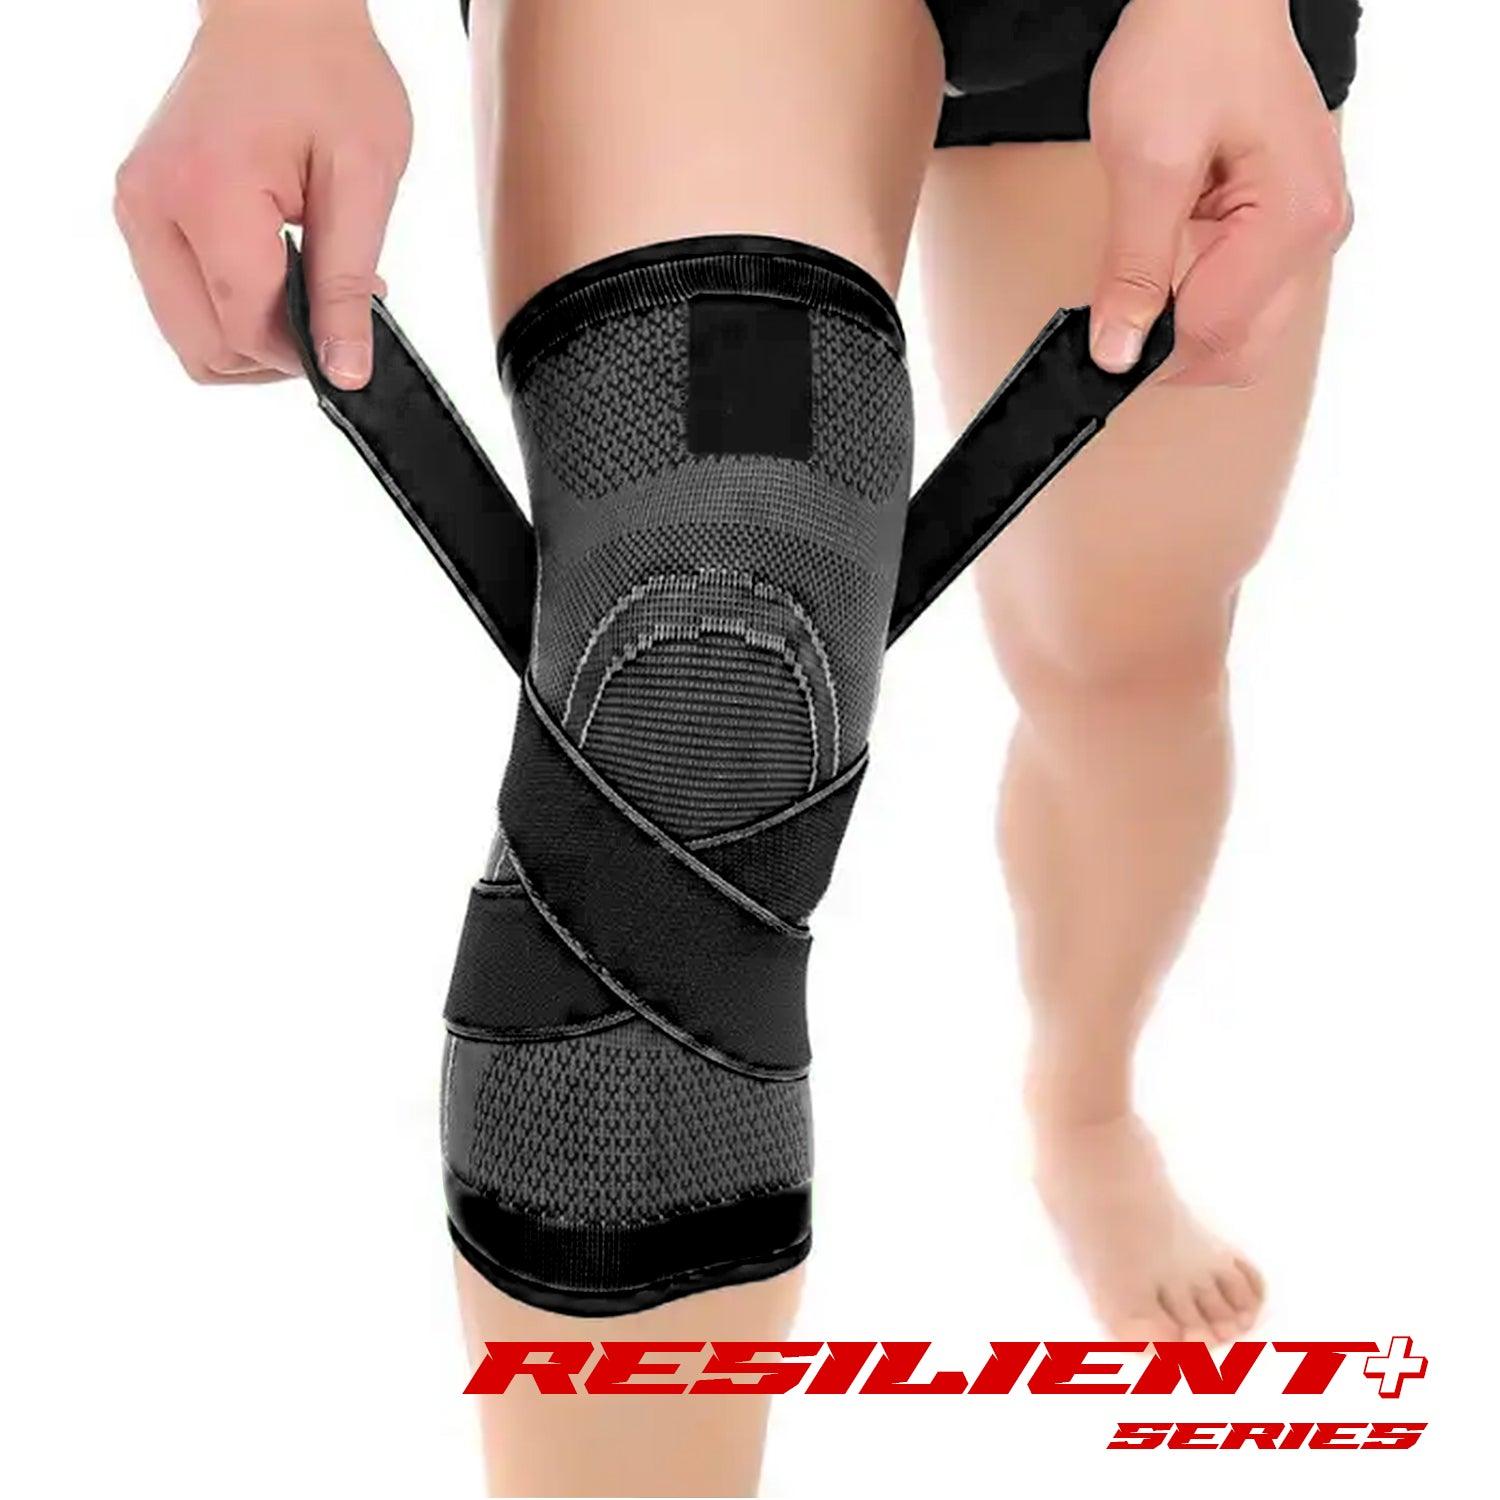 Knee Support Resilient+ Series 1 pc Grey Sports, Injury Rehabilitation, Adjustable, 30cm brace, Joint Pain,  Arthritis, igament Injury, Meniscus Tear, ACL, MCL, Tendonitis, Running, Squats, Sports, side stabilizers, compression image 3